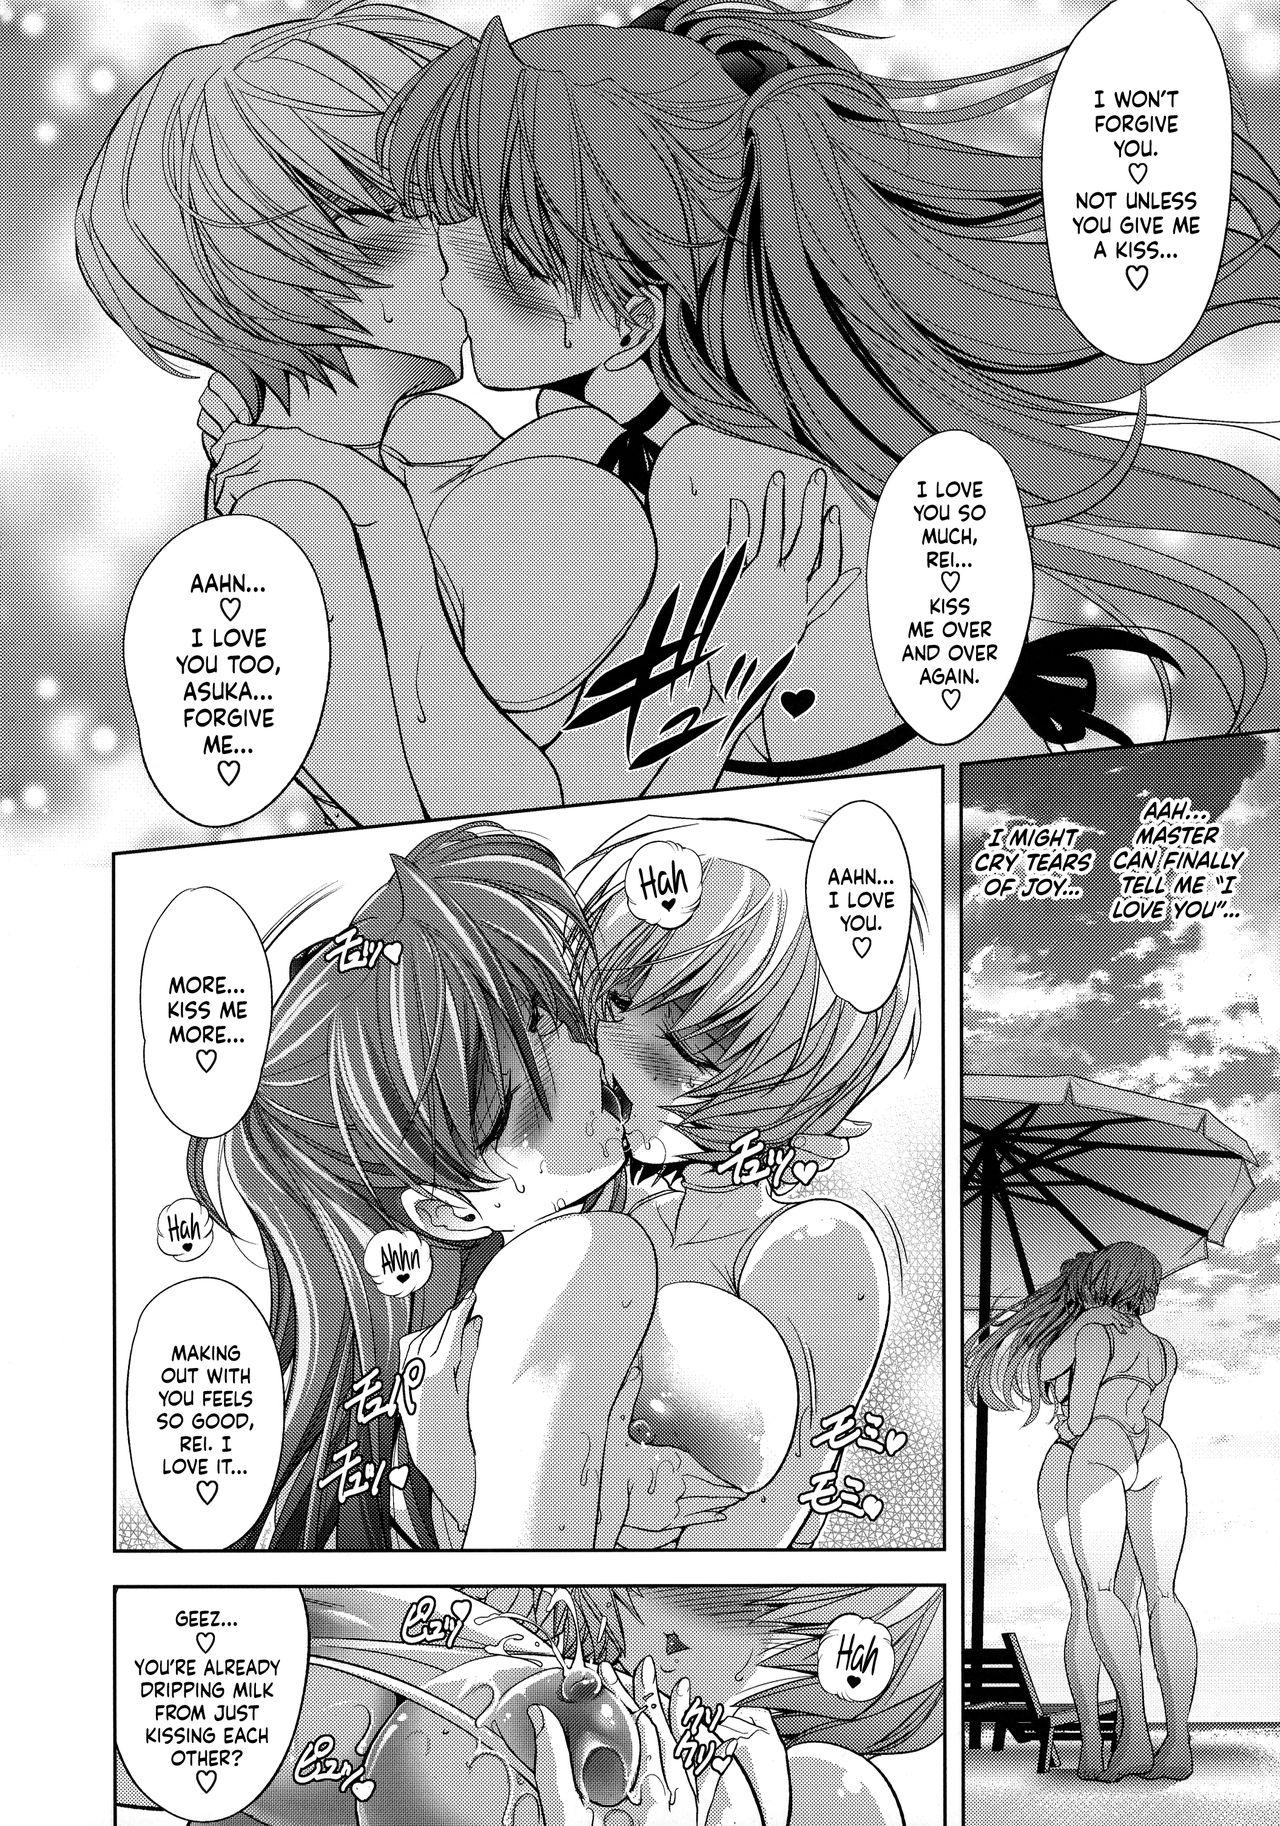 Hot Girl Lovey Dovey - Neon genesis evangelion Free Blowjob - Page 7